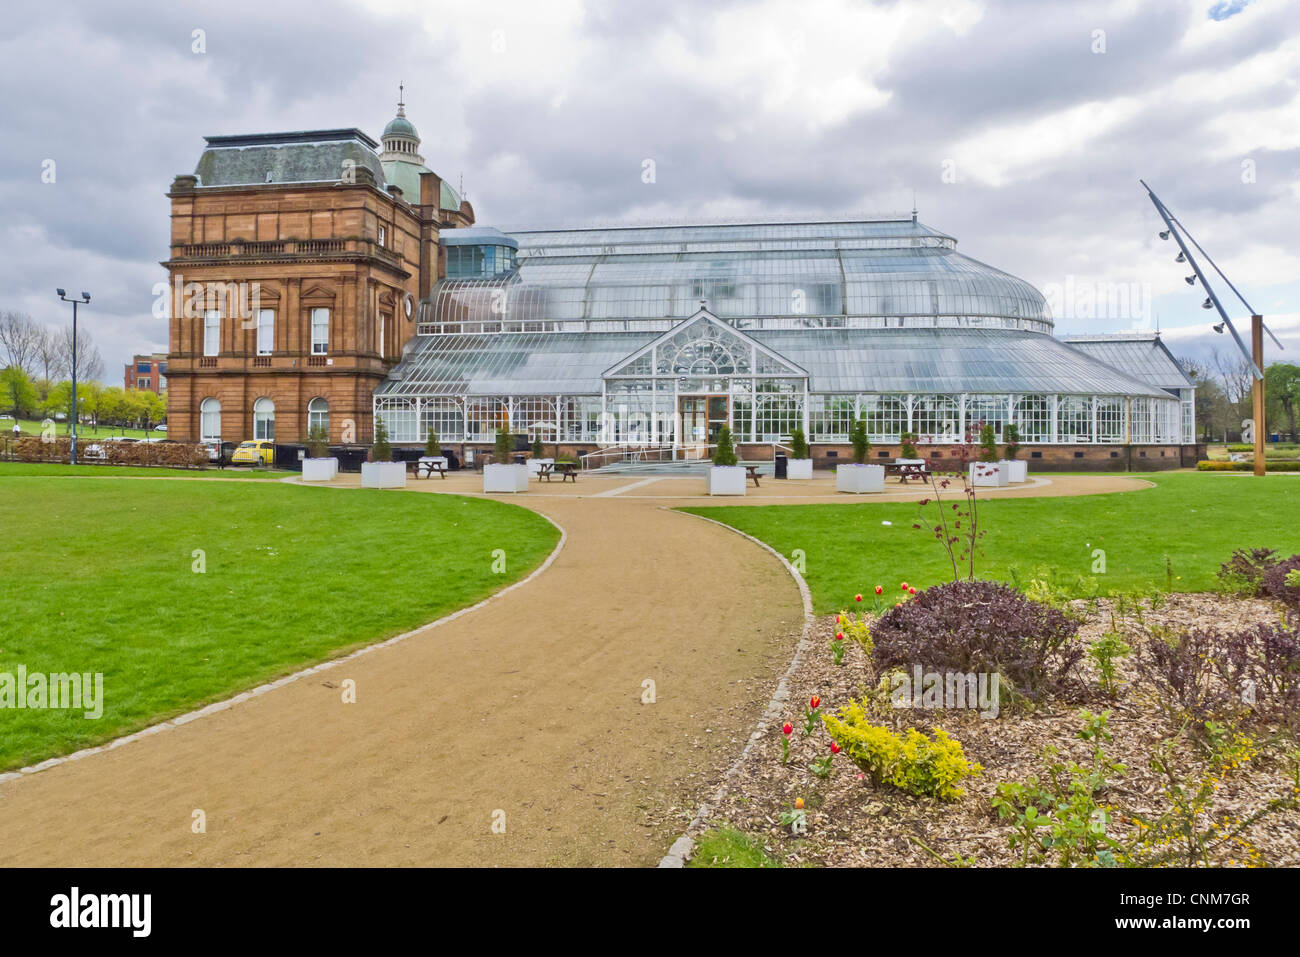 People's Palace and Winter Gardens in Glasgow Green park Glasgow Scotland Stock Photo